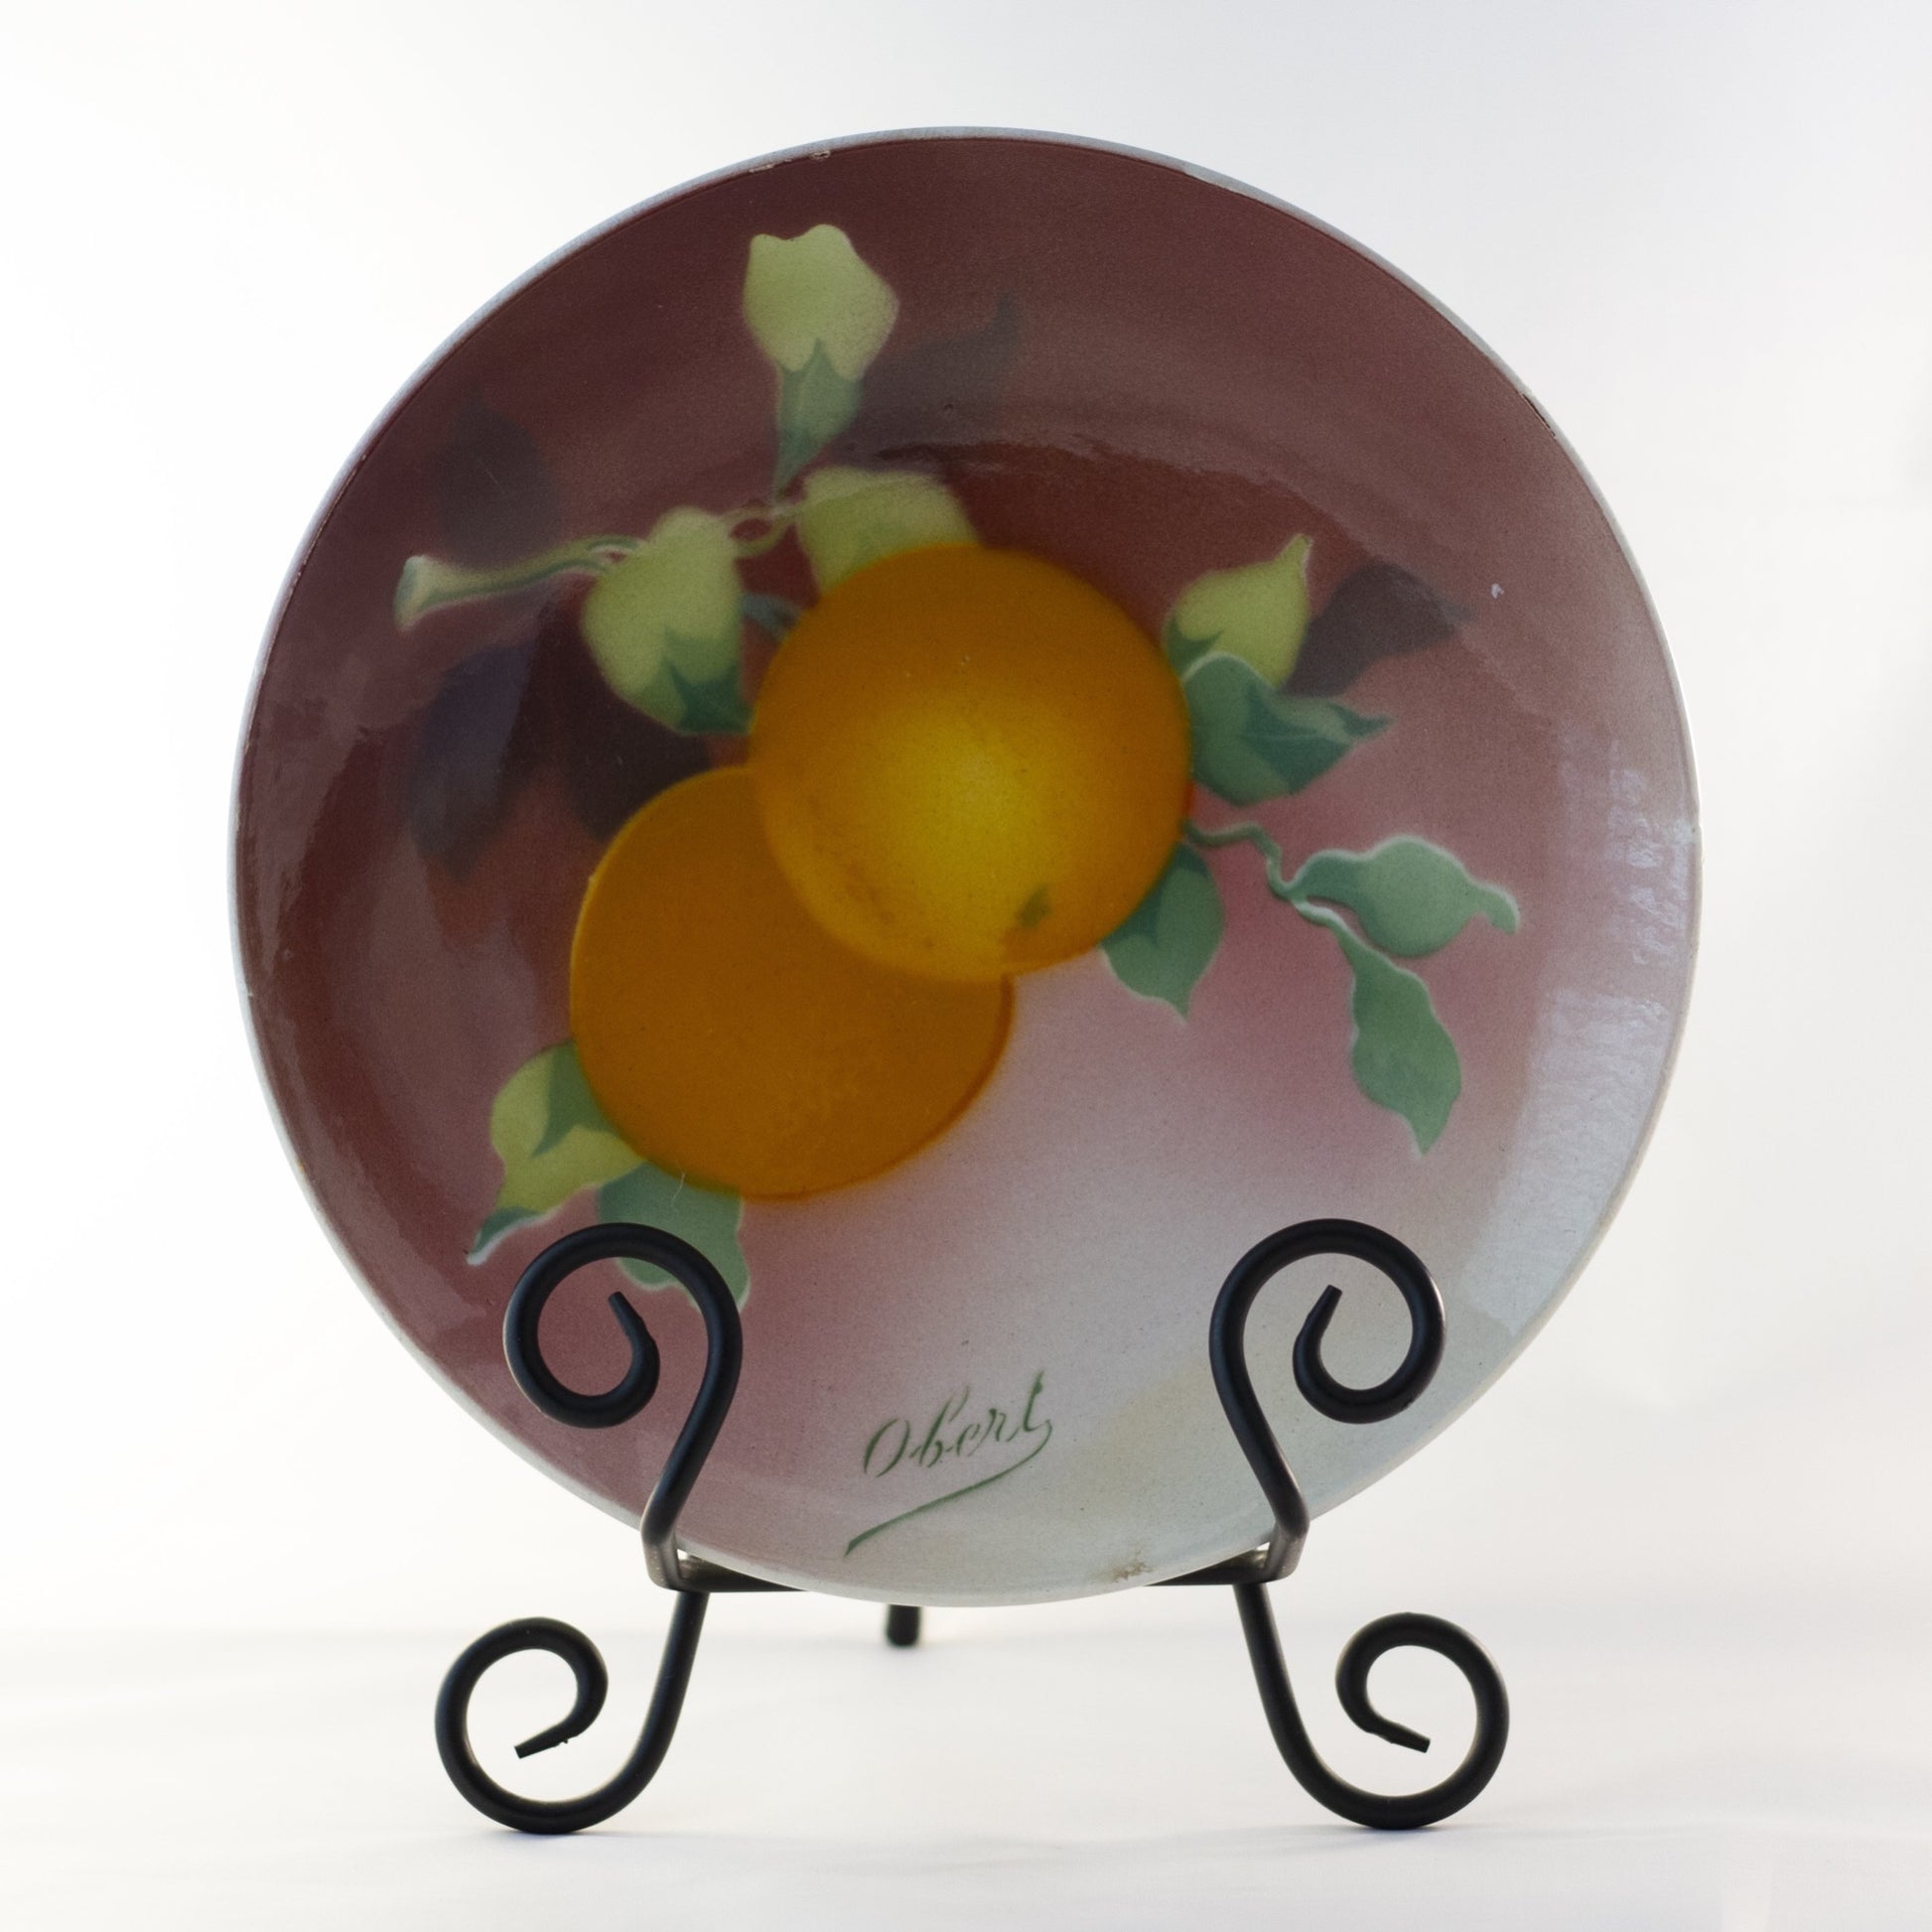 K & G LUNEVILLE FRENCH FAIENCE PLATE HAND PAINTED ORANGES Signed Obert Circa 1900